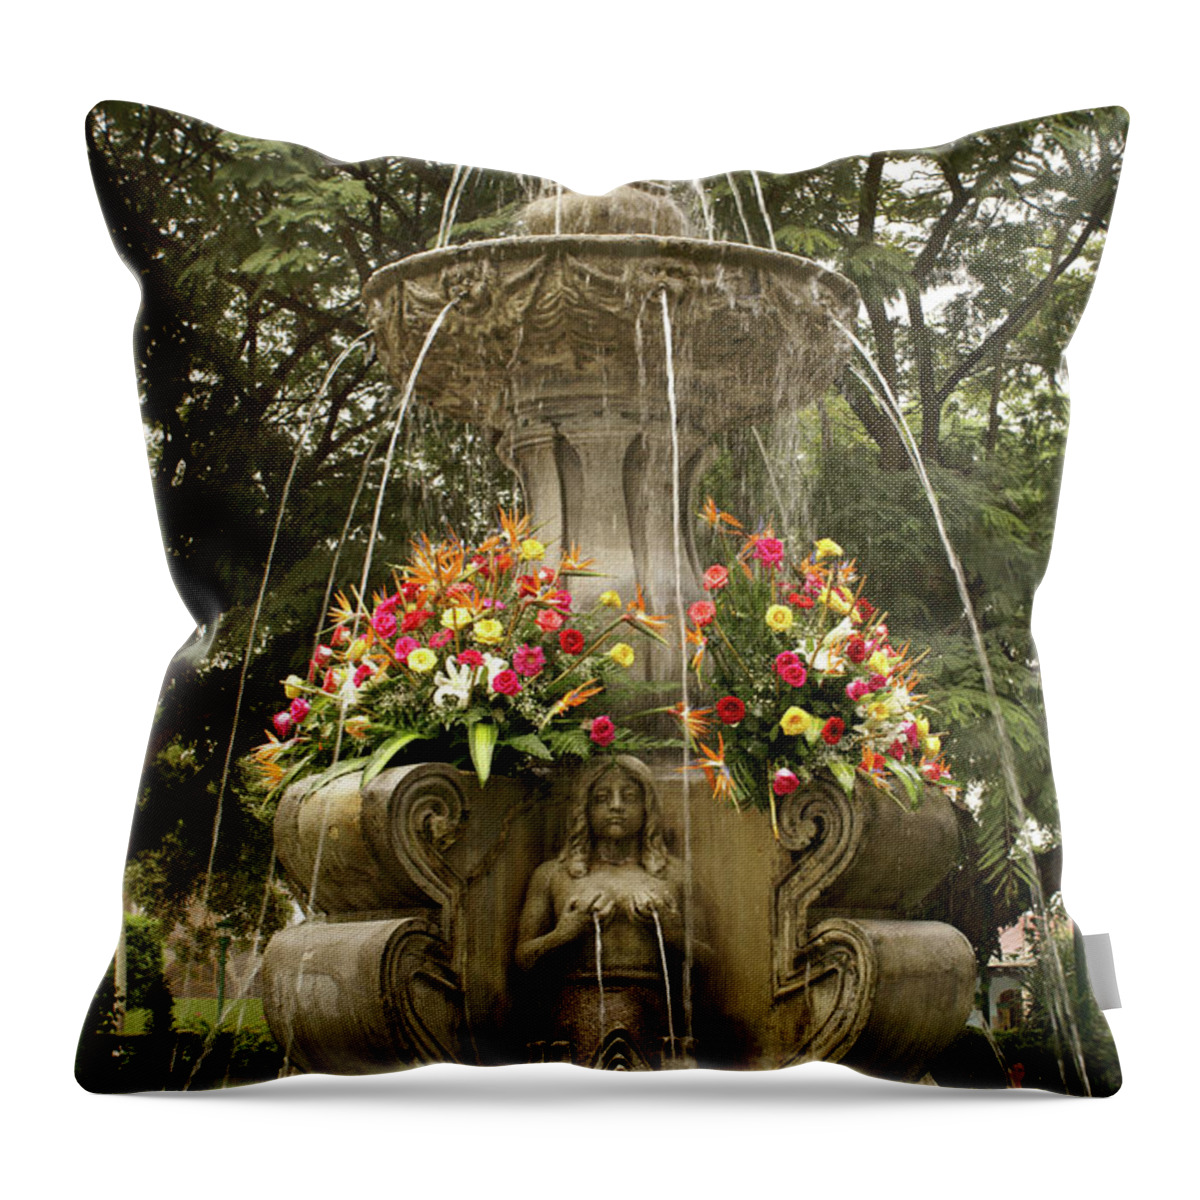 Guatemala Throw Pillow featuring the photograph Antigua Fountain by John Mitchell